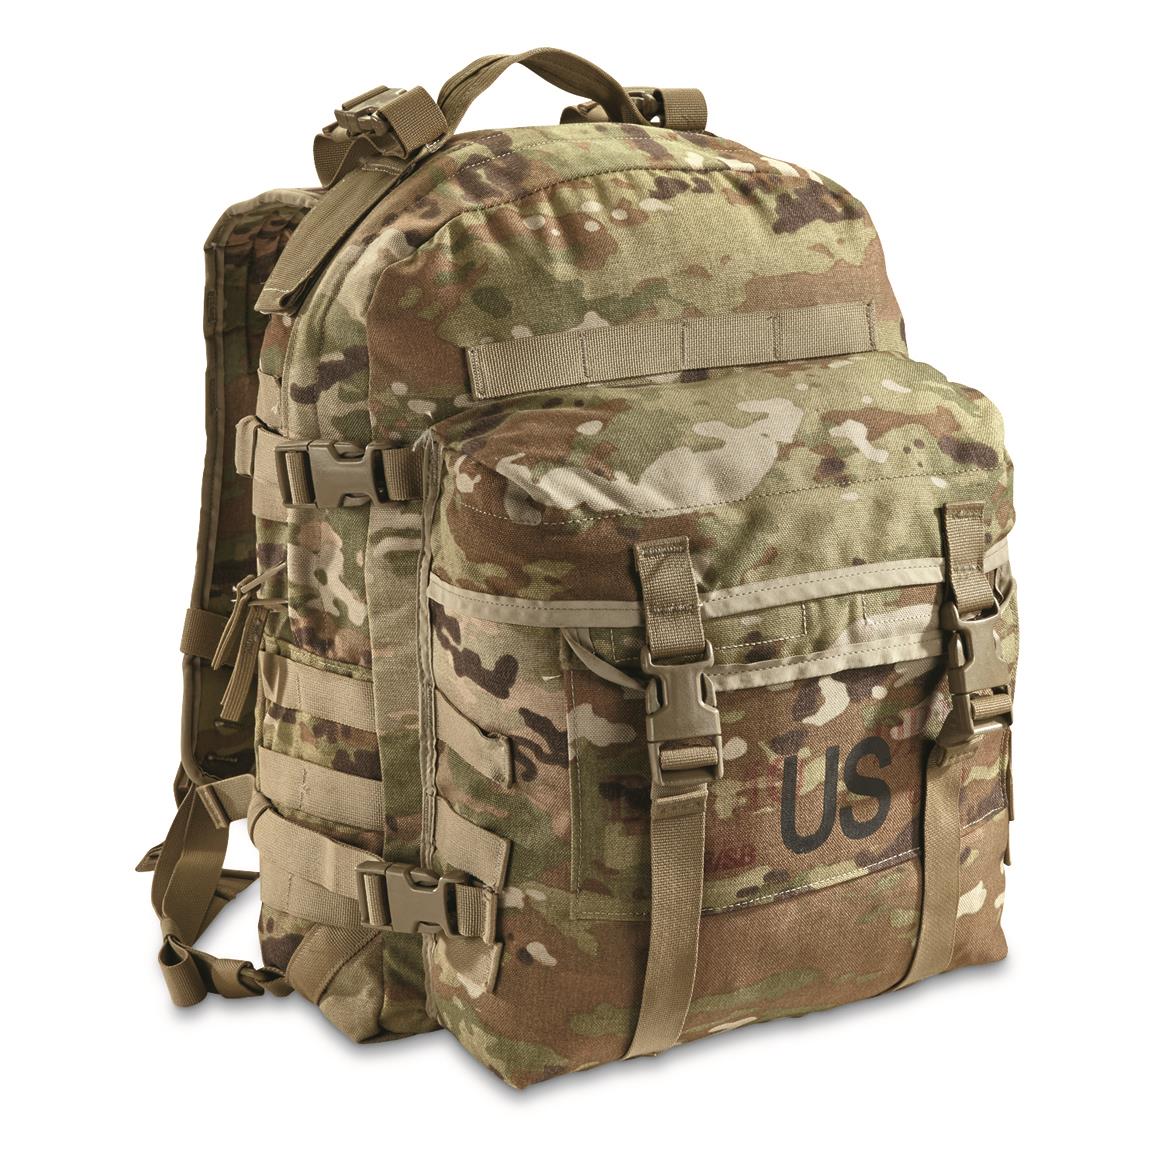 US ARMY ACU ASSAULT PACK 3 DAY MOLLE II BACKPACK BUG OUT BAG Good No Stiffener 